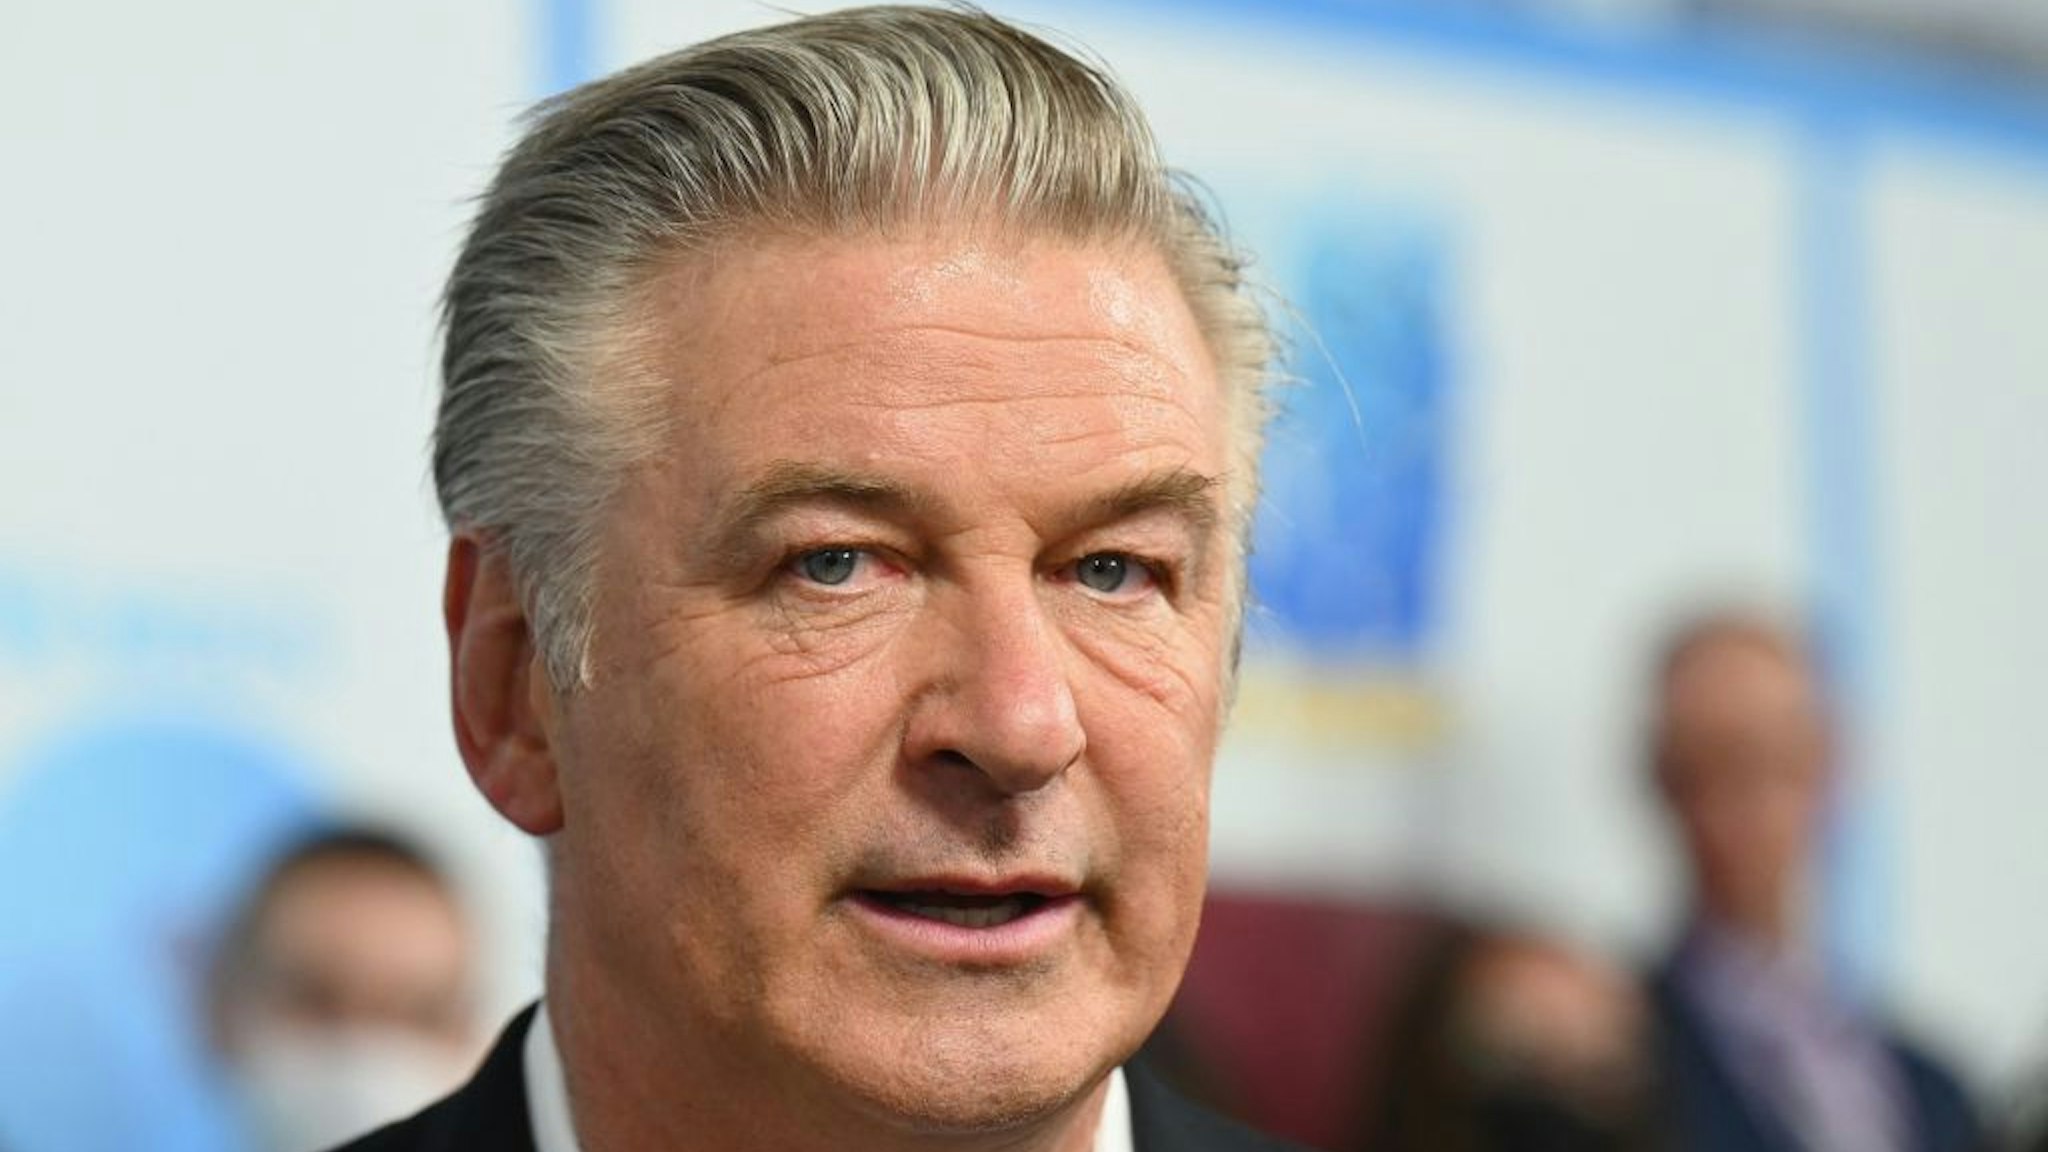 US actor Alec Baldwin attends DreamWorks Animation's "The Boss Baby: Family Business" premiere at SVA Theatre on June 22, 2021 in New York City. (Photo by Angela Weiss / AFP) (Photo by ANGELA WEISS/AFP via Getty Images)